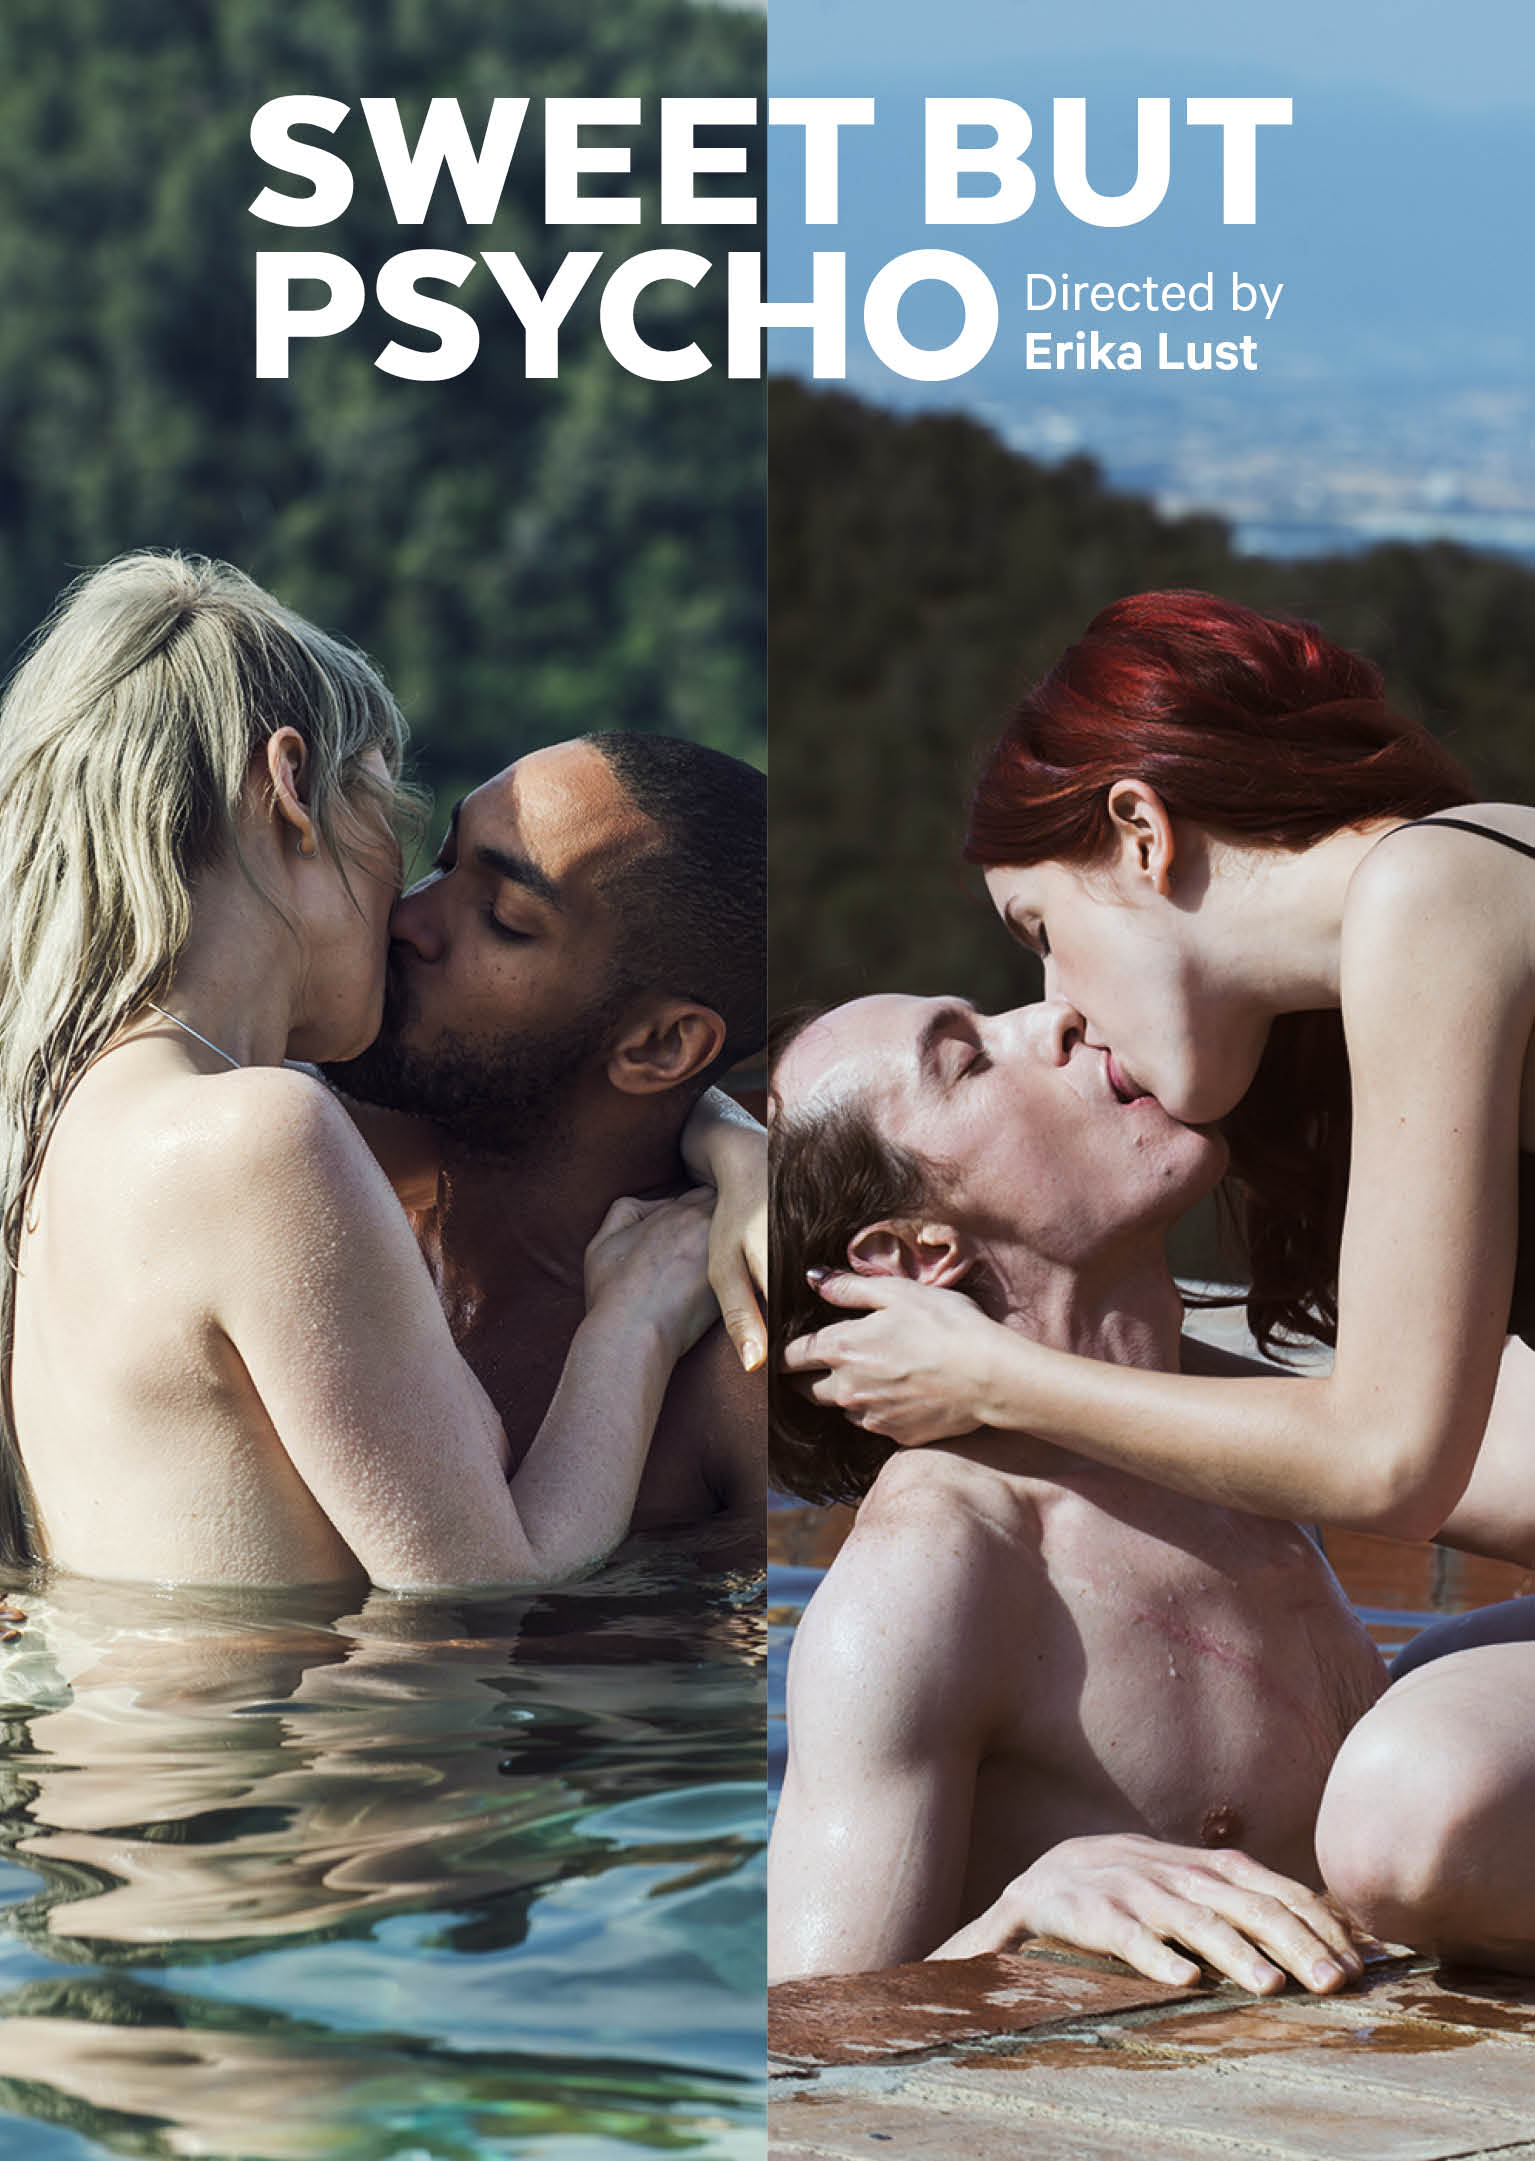 Watch Online Sweet but Psycho, Porn Movie Directed By Erika Lust